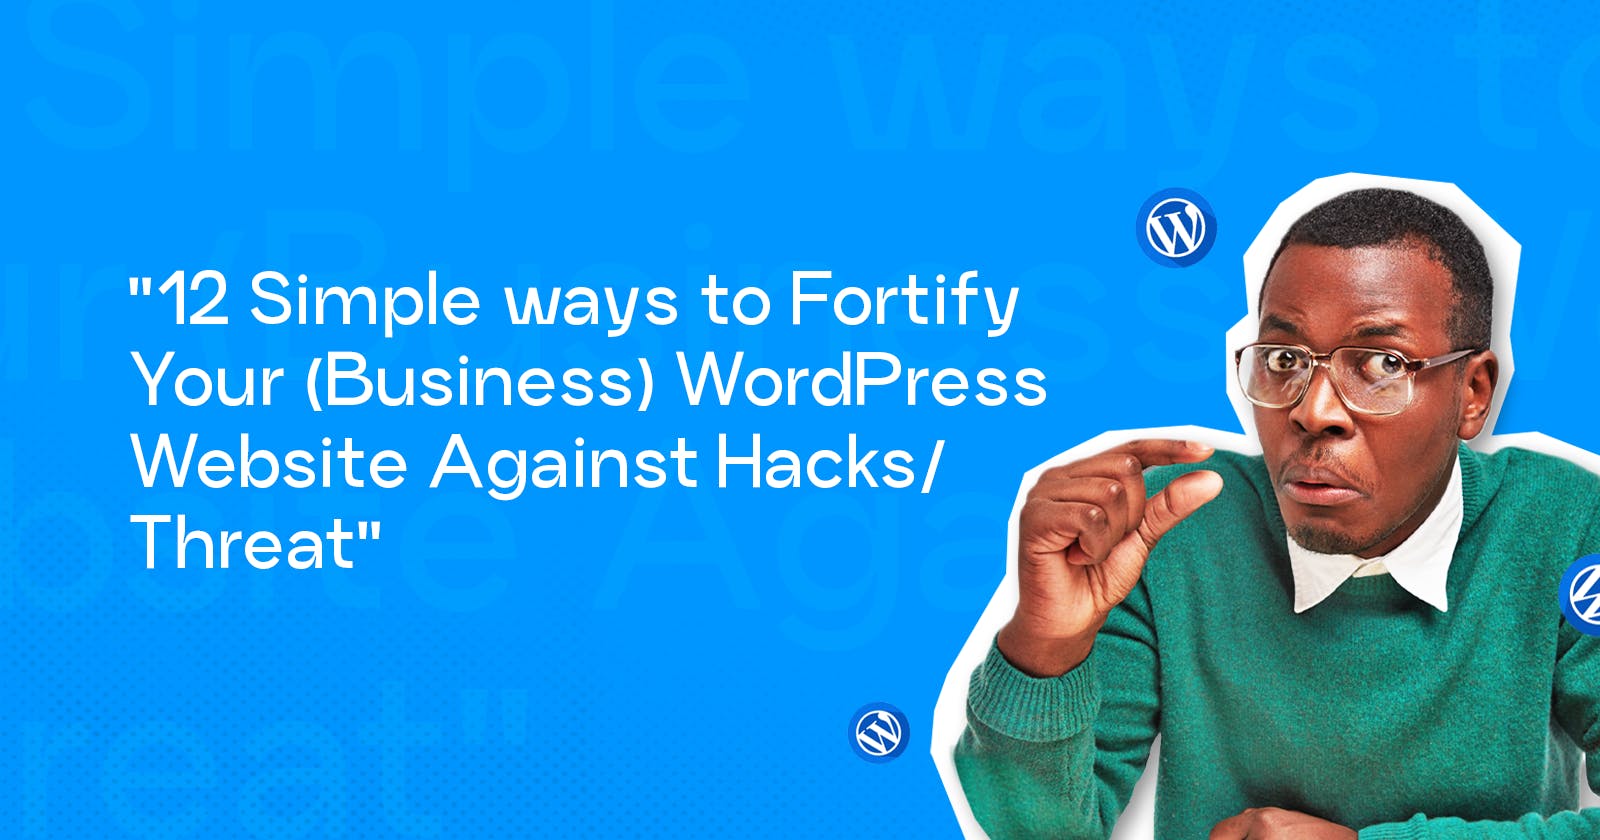 12 Simple ways to Fortify Your (Business) WordPress Website Against Hacks / Threat